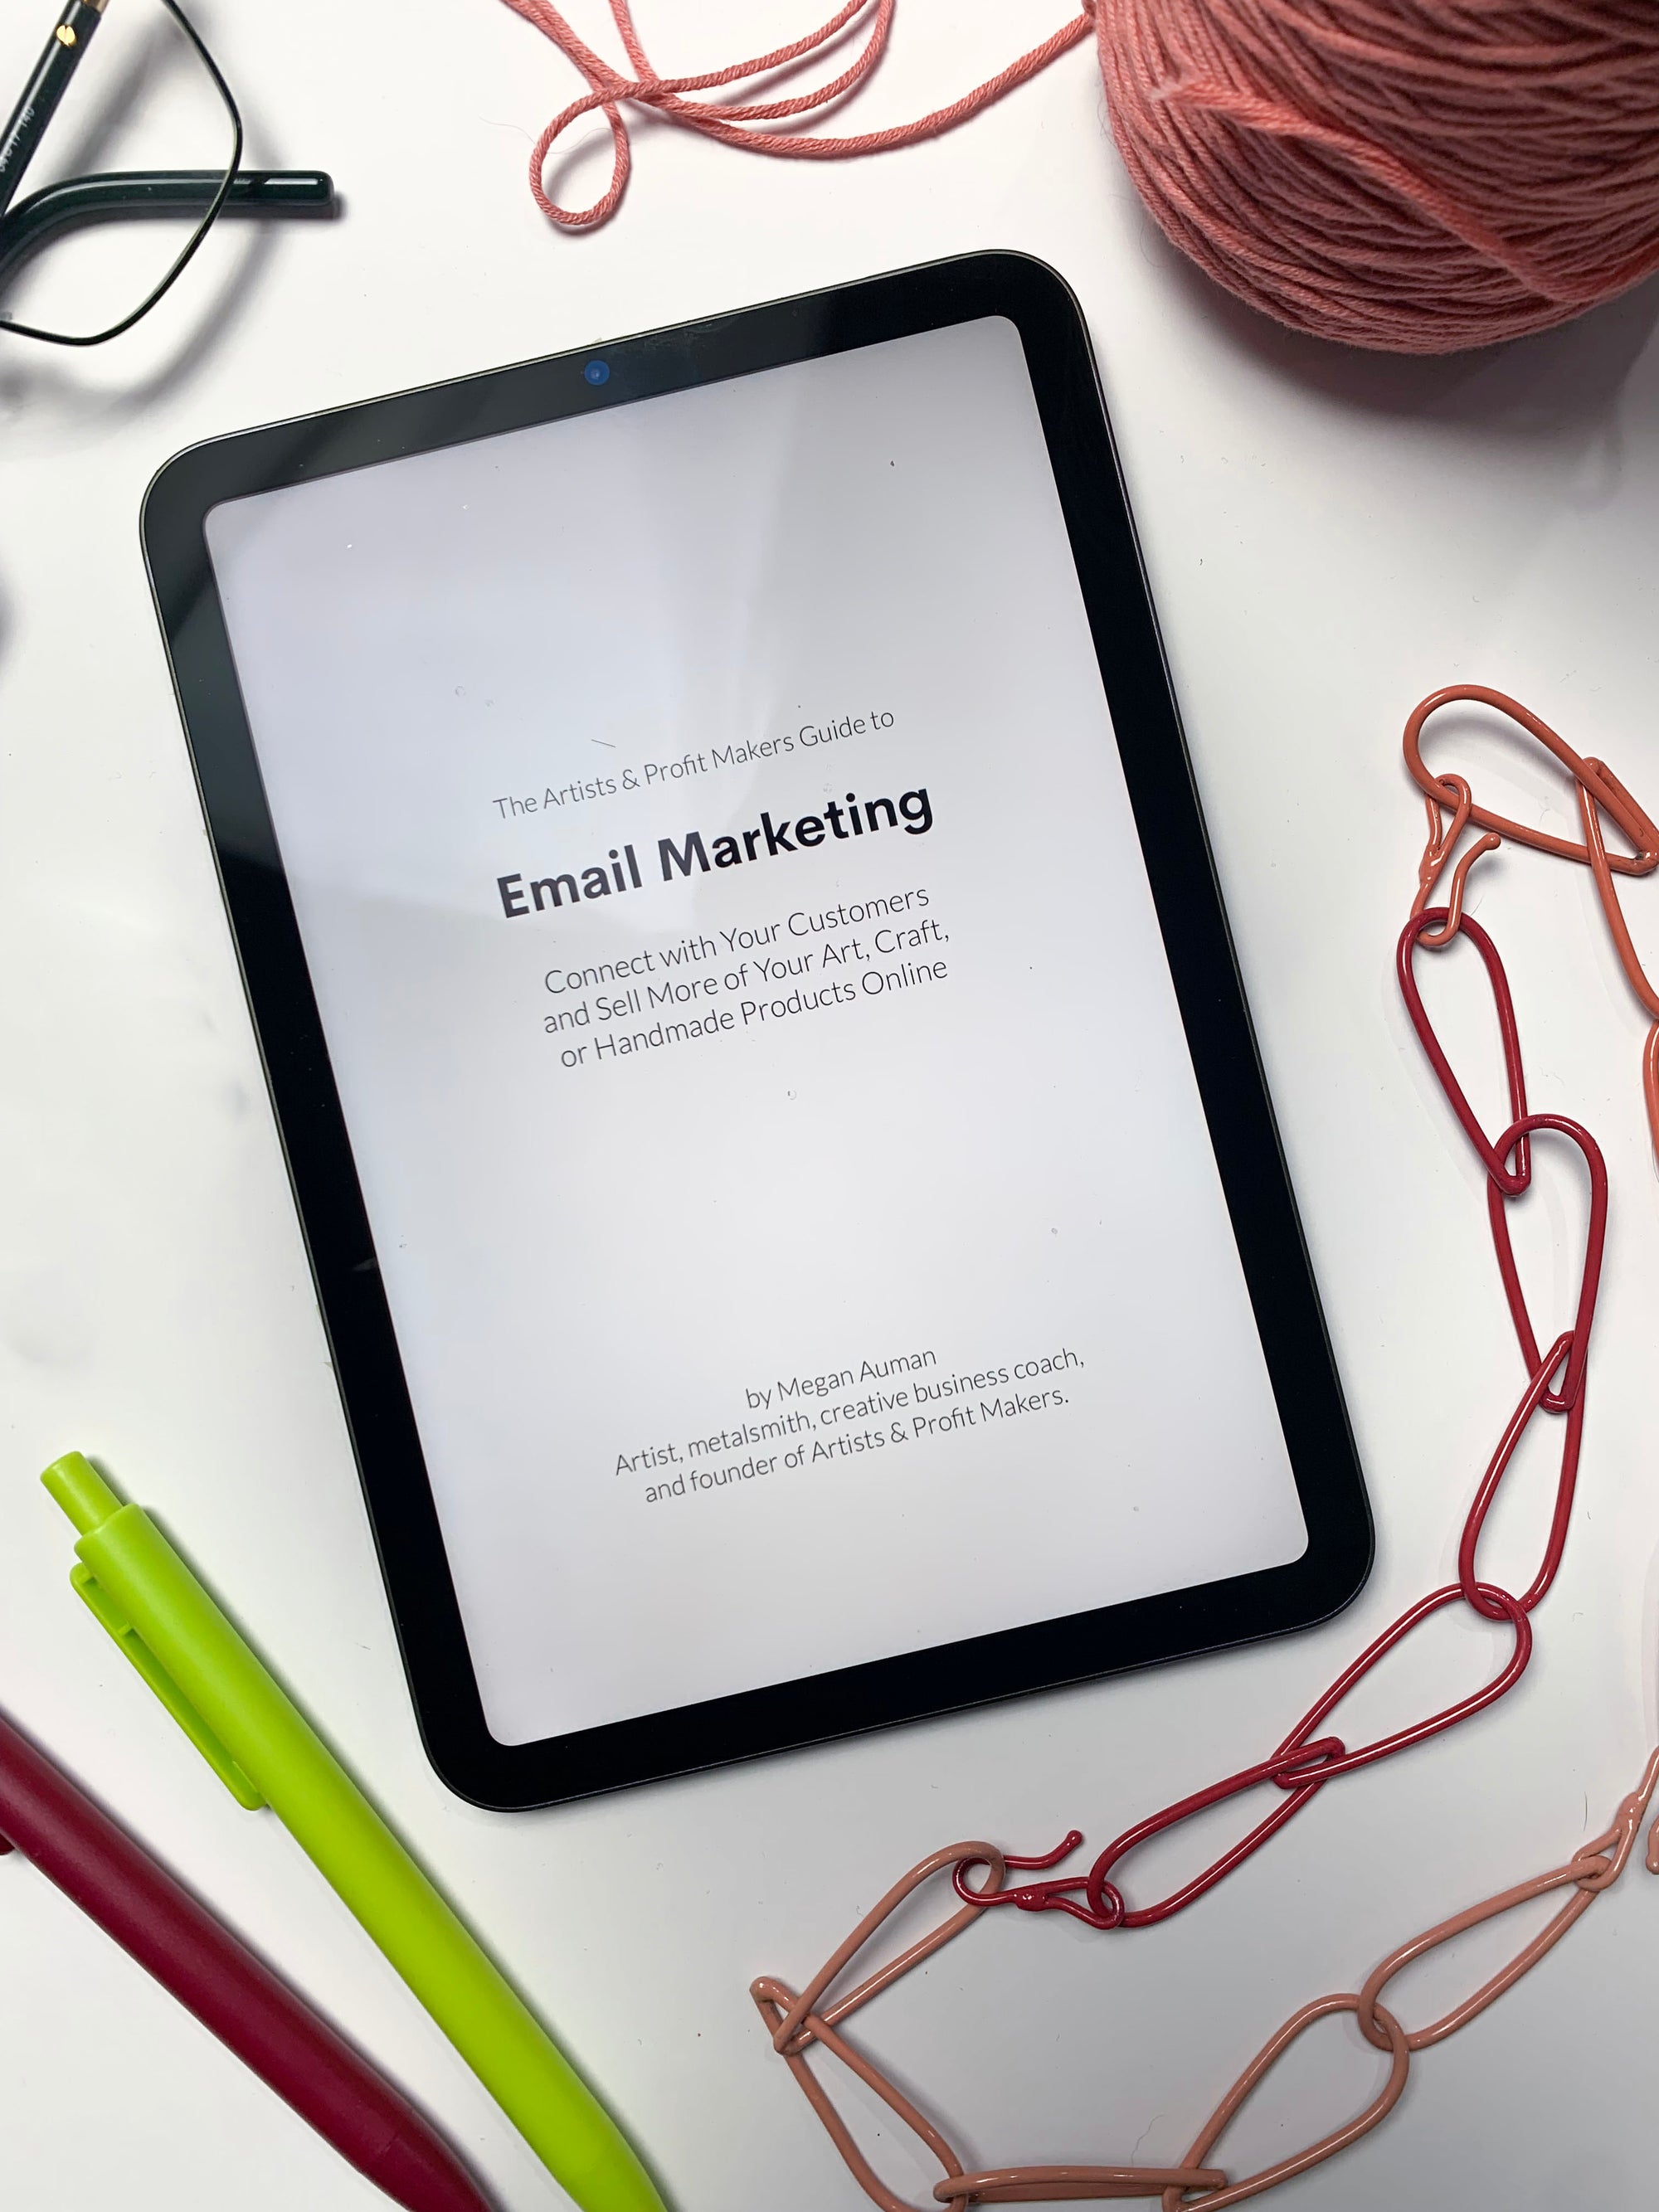 The Artists & Profit Makers Guide to Email Marketing Digital Edition